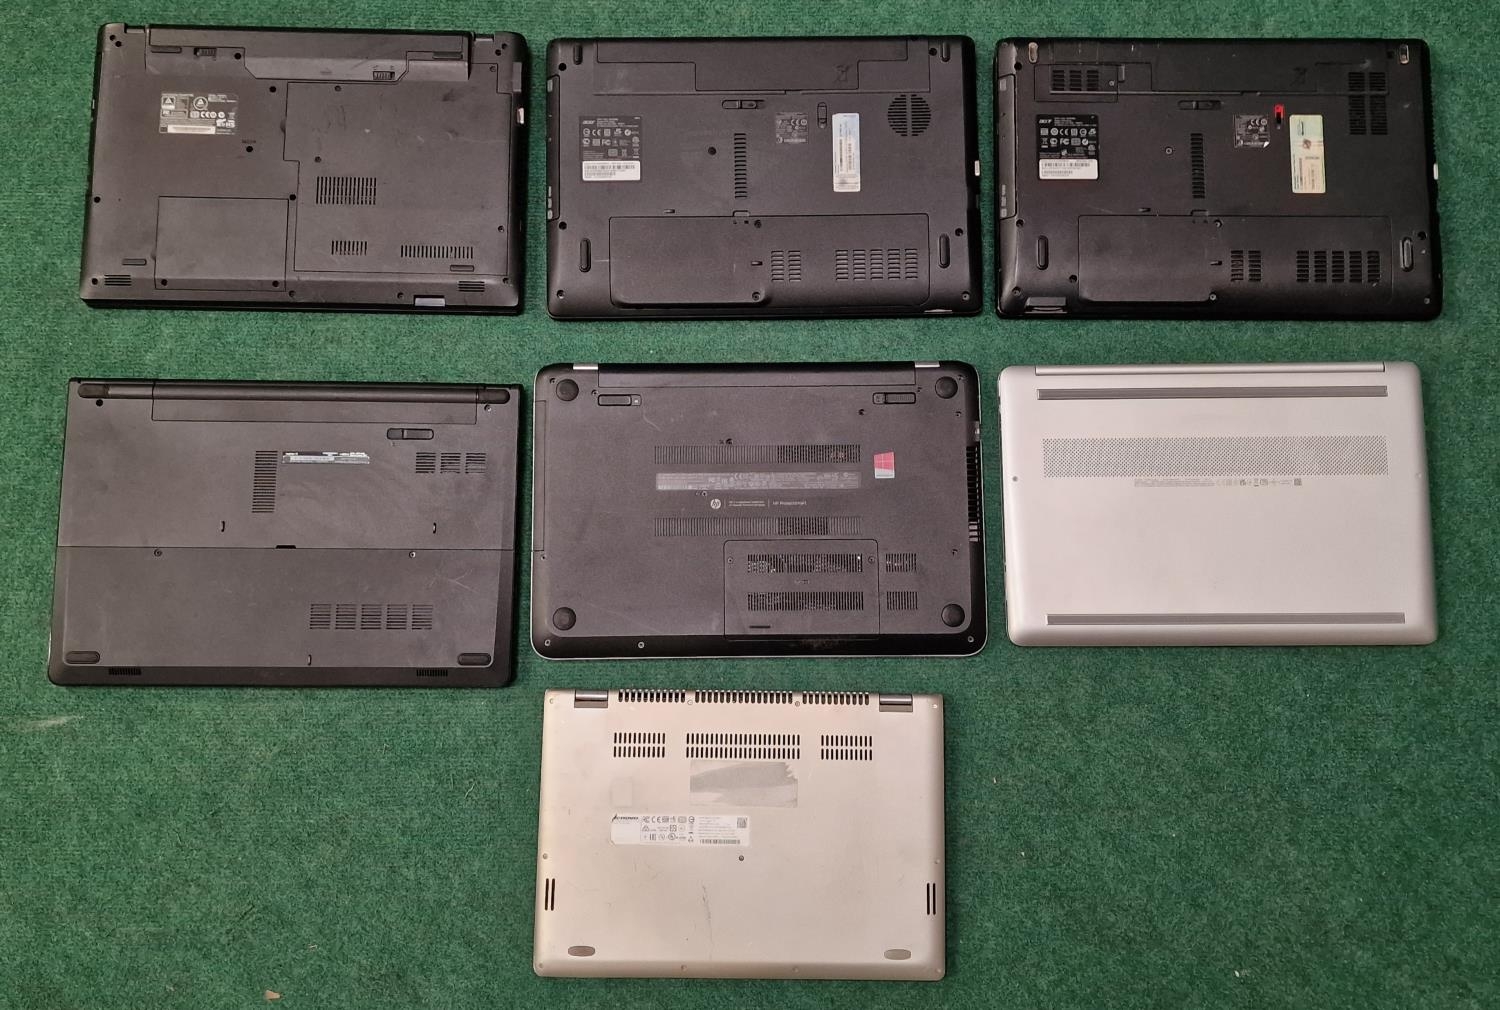 Collection of 7 laptop computers to include - Notebook W550SU - Acer Aspire 5741 and 5733 - Dell - Image 2 of 2